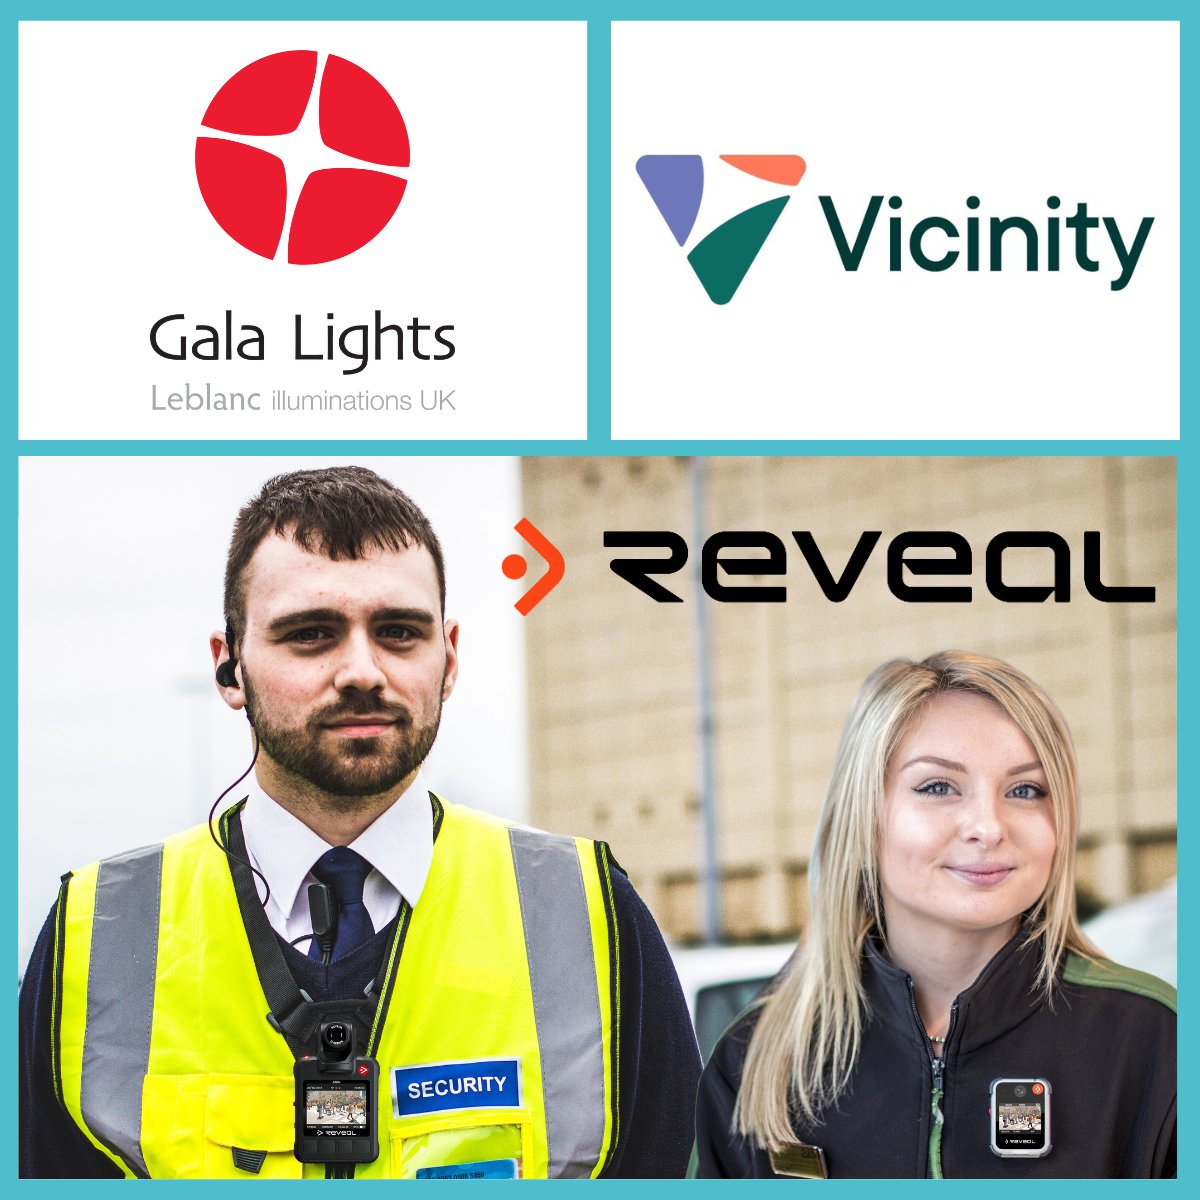 Say hello to our suppliers! 👋 🔹 GALA LIGHTS LTD 🔹 VICINITY 🔹 REVEAL MEDIA Find out more here: britishbids.info/services/suppl… #BritishBIDS #SuppliersPortal